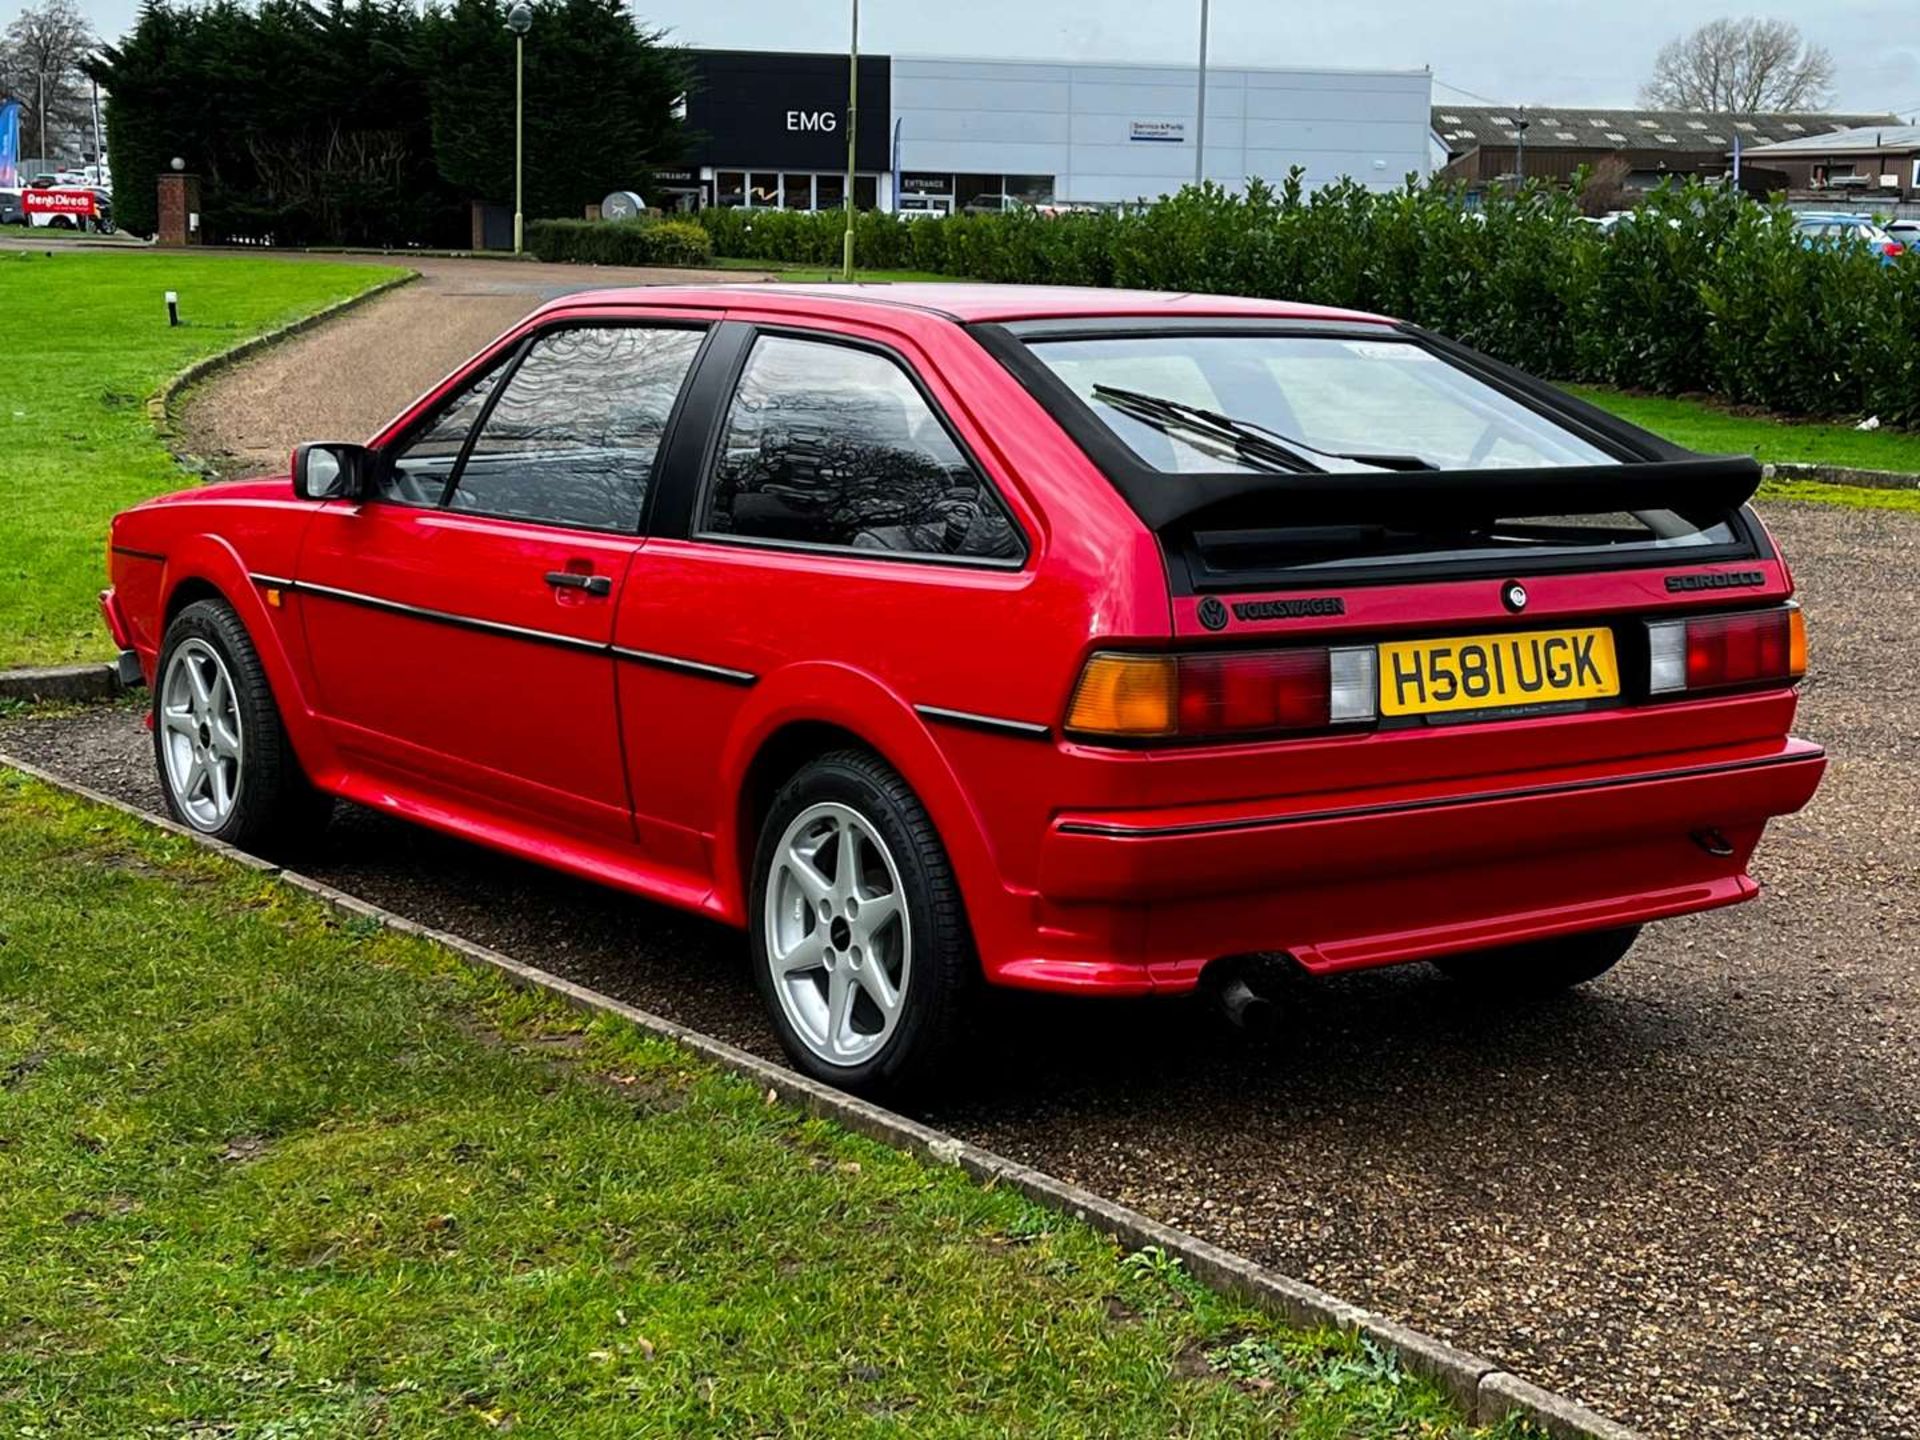 1990 VW SCIROCCO 1.8 GT - Image 5 of 29